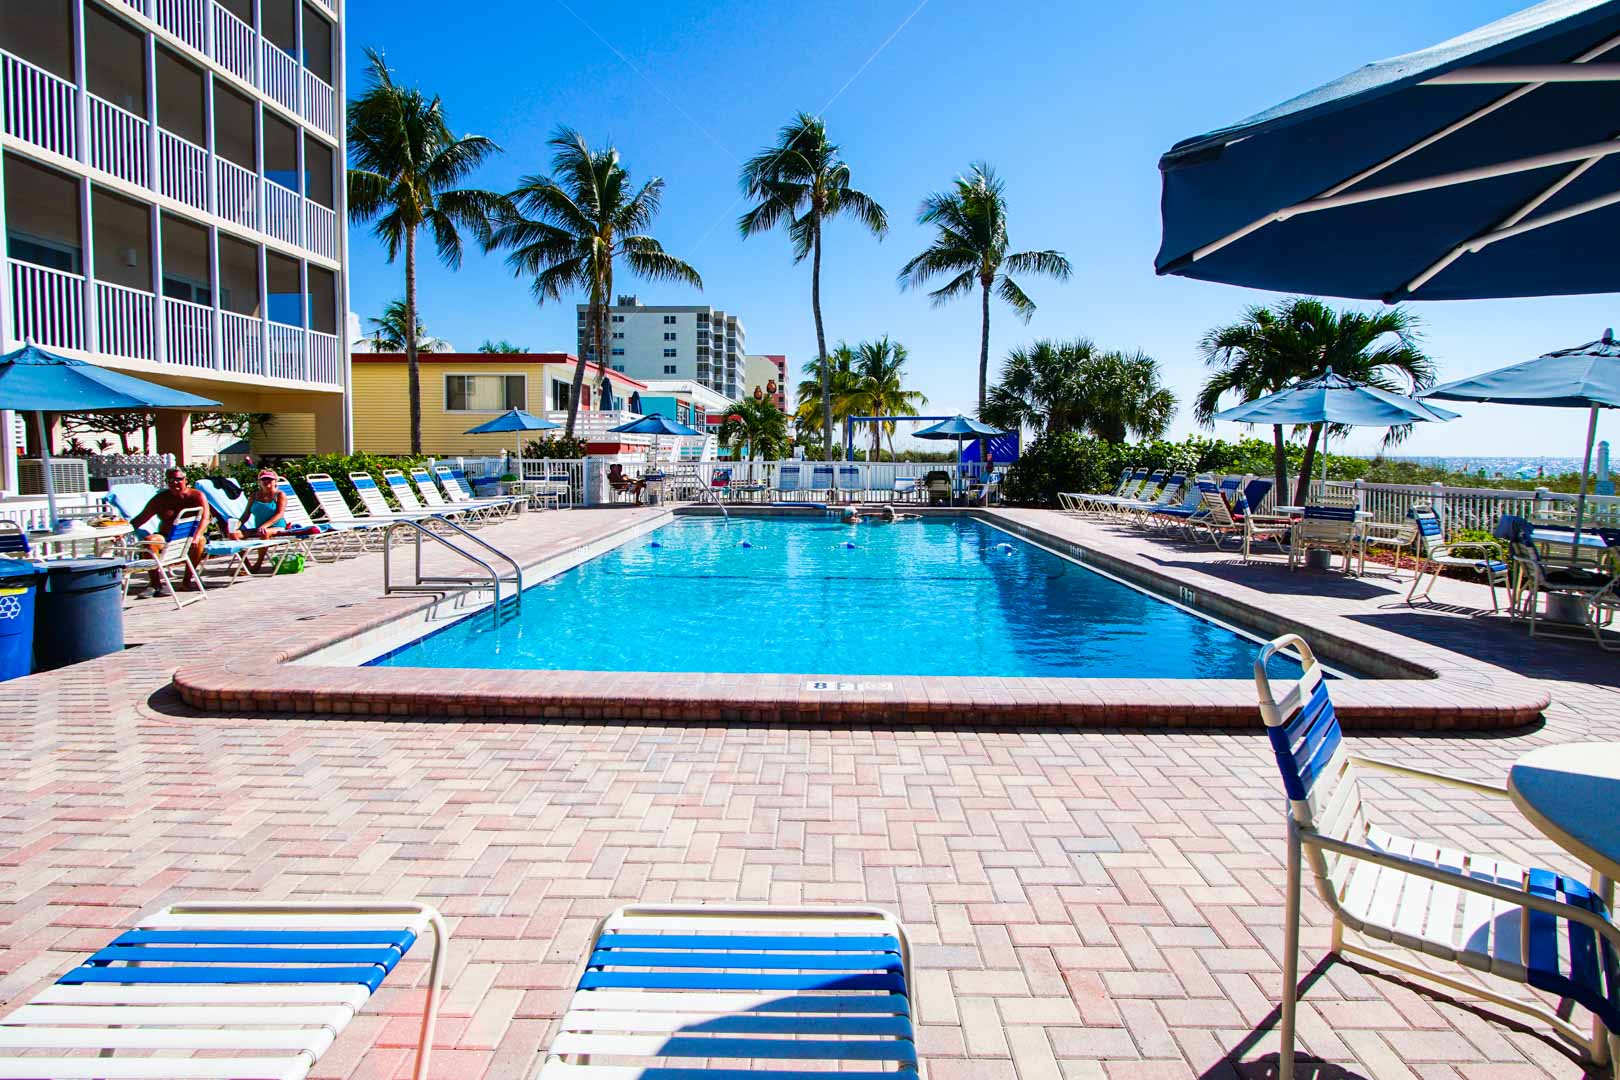 A clean crisp pool at VRI's Windward Passage Resort in Fort Myers Beach, Florida.